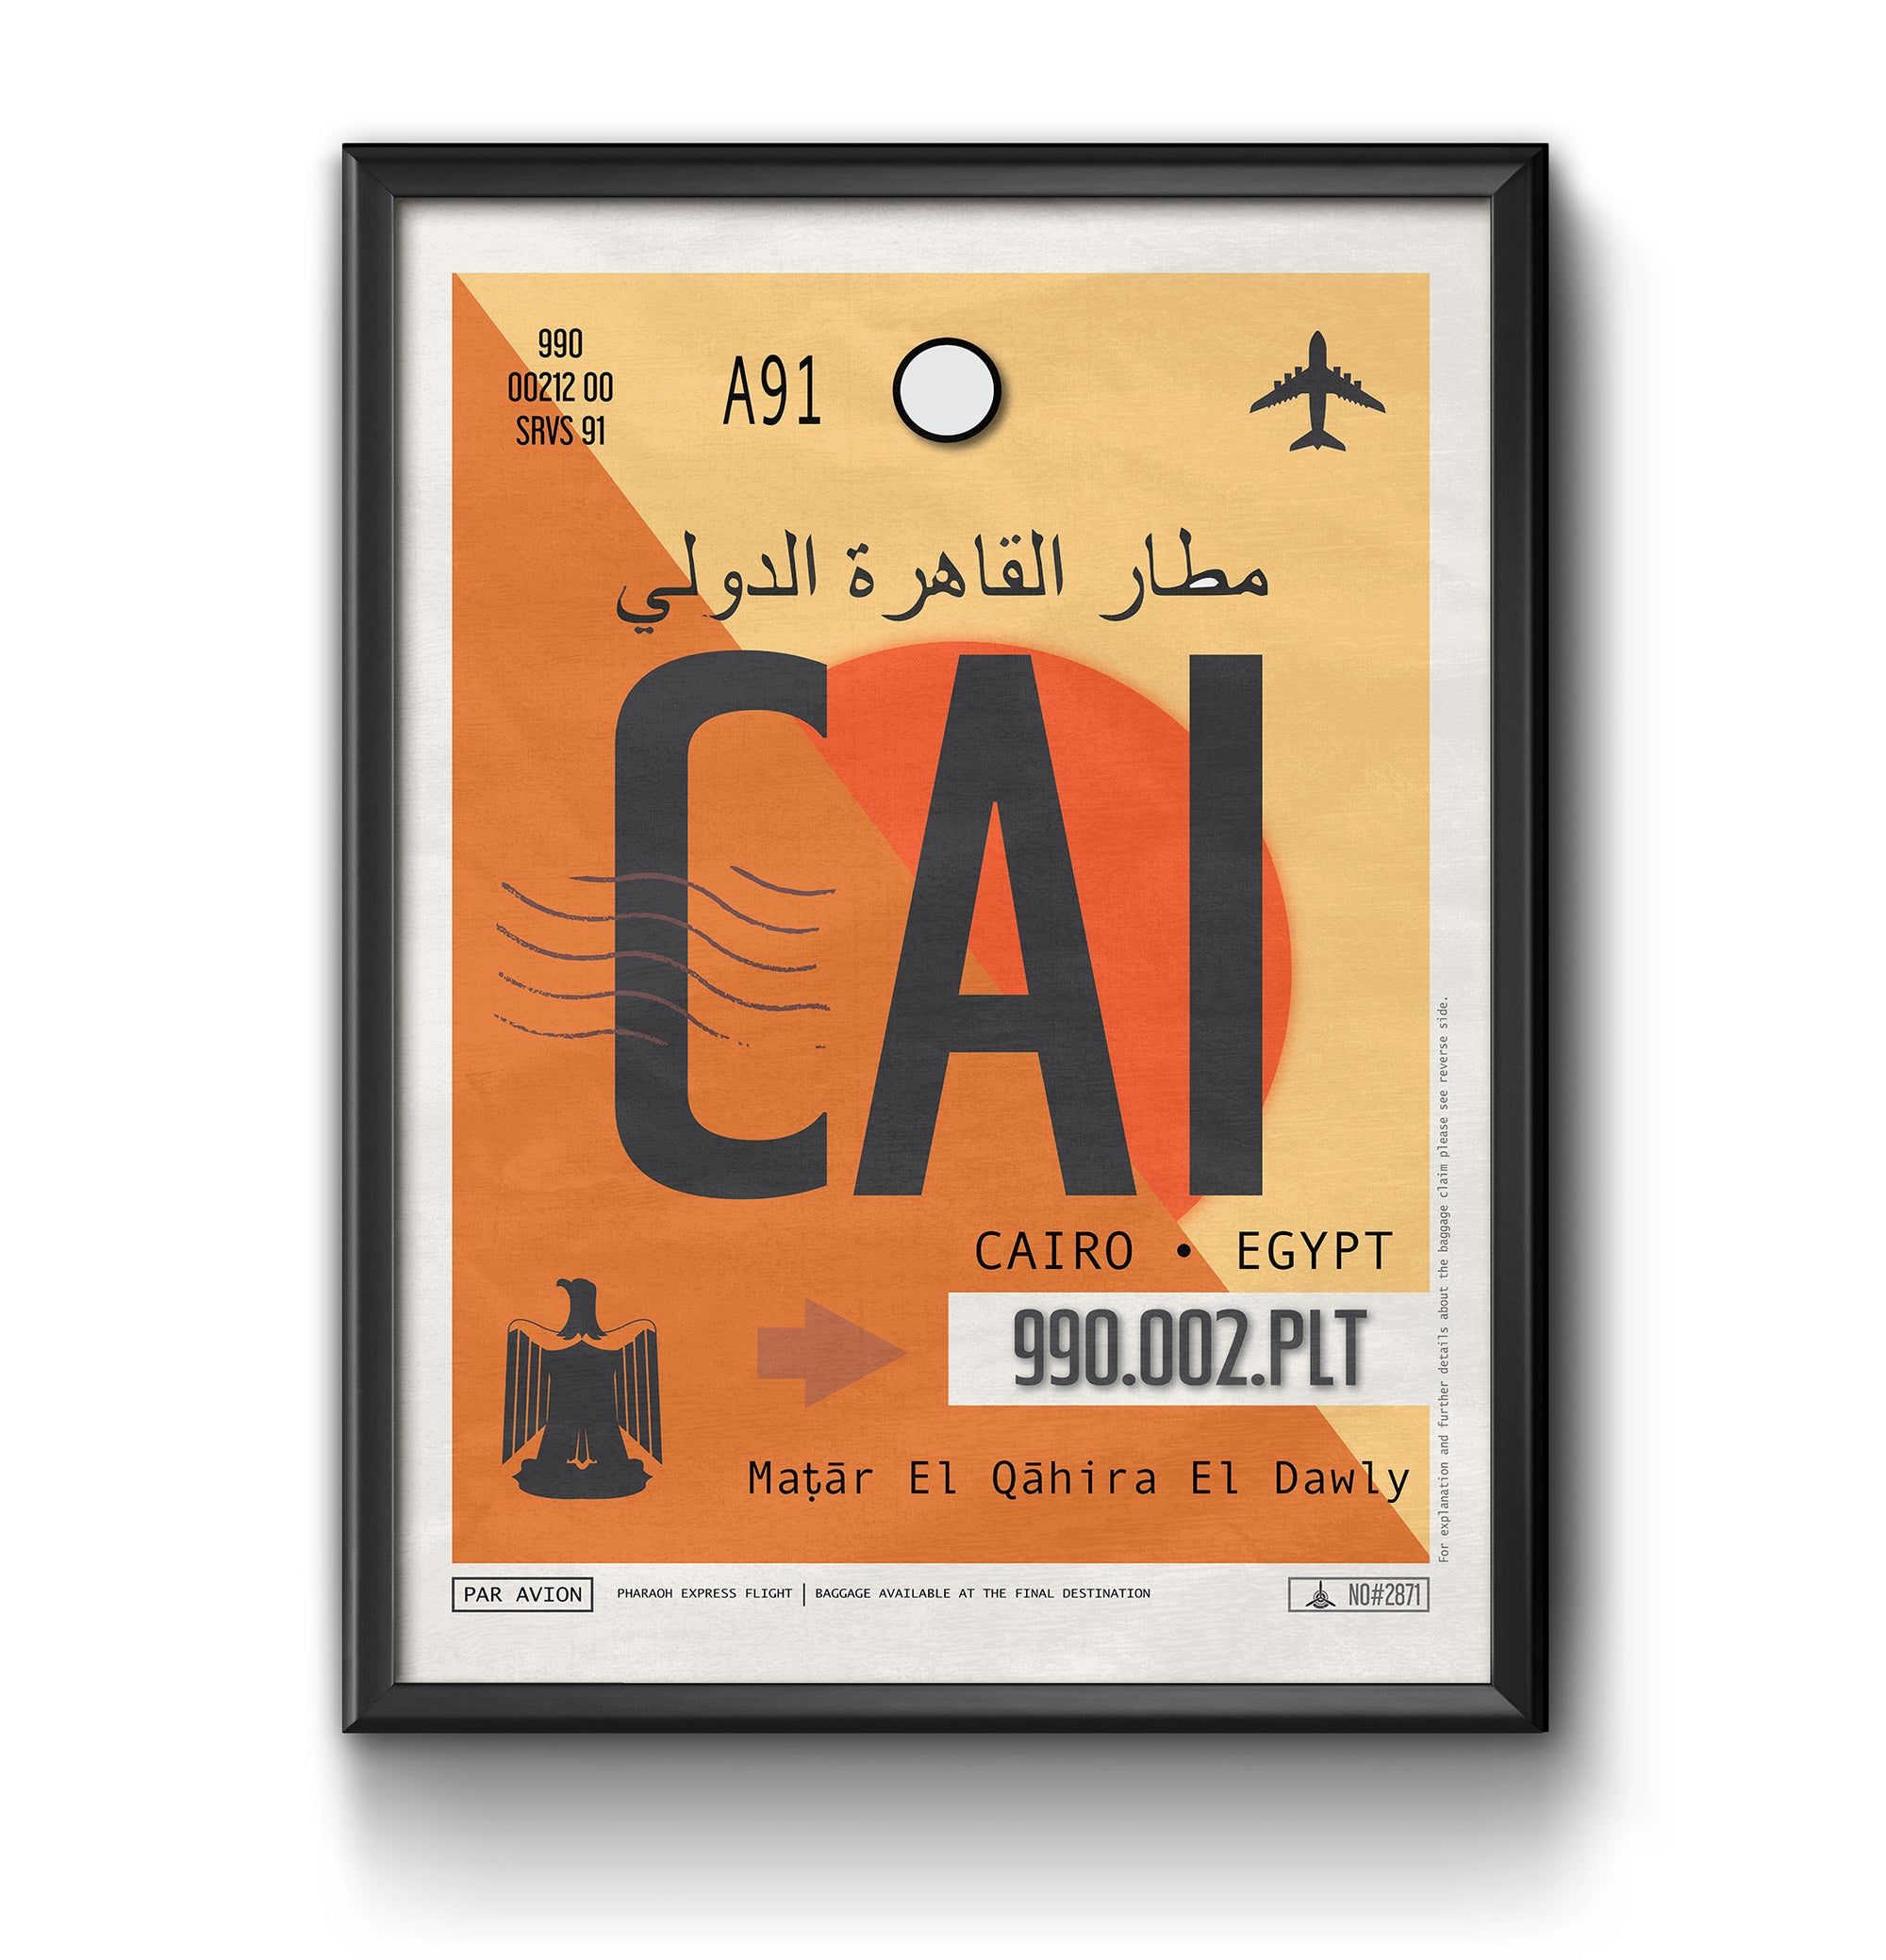 cairo egypt CAI airport tag poster luggage tag 